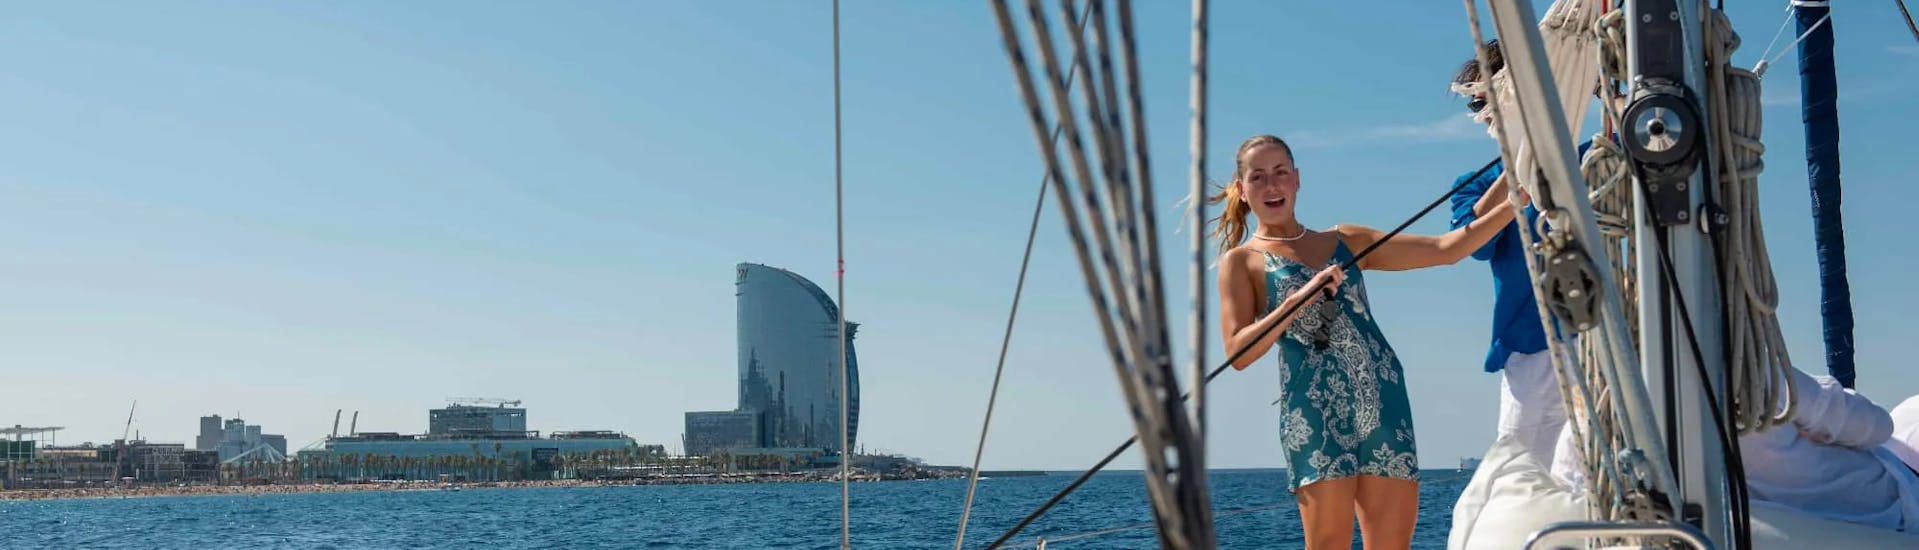 Sailboat Trip in Barcelona with Drinks, Snacks & SUP.